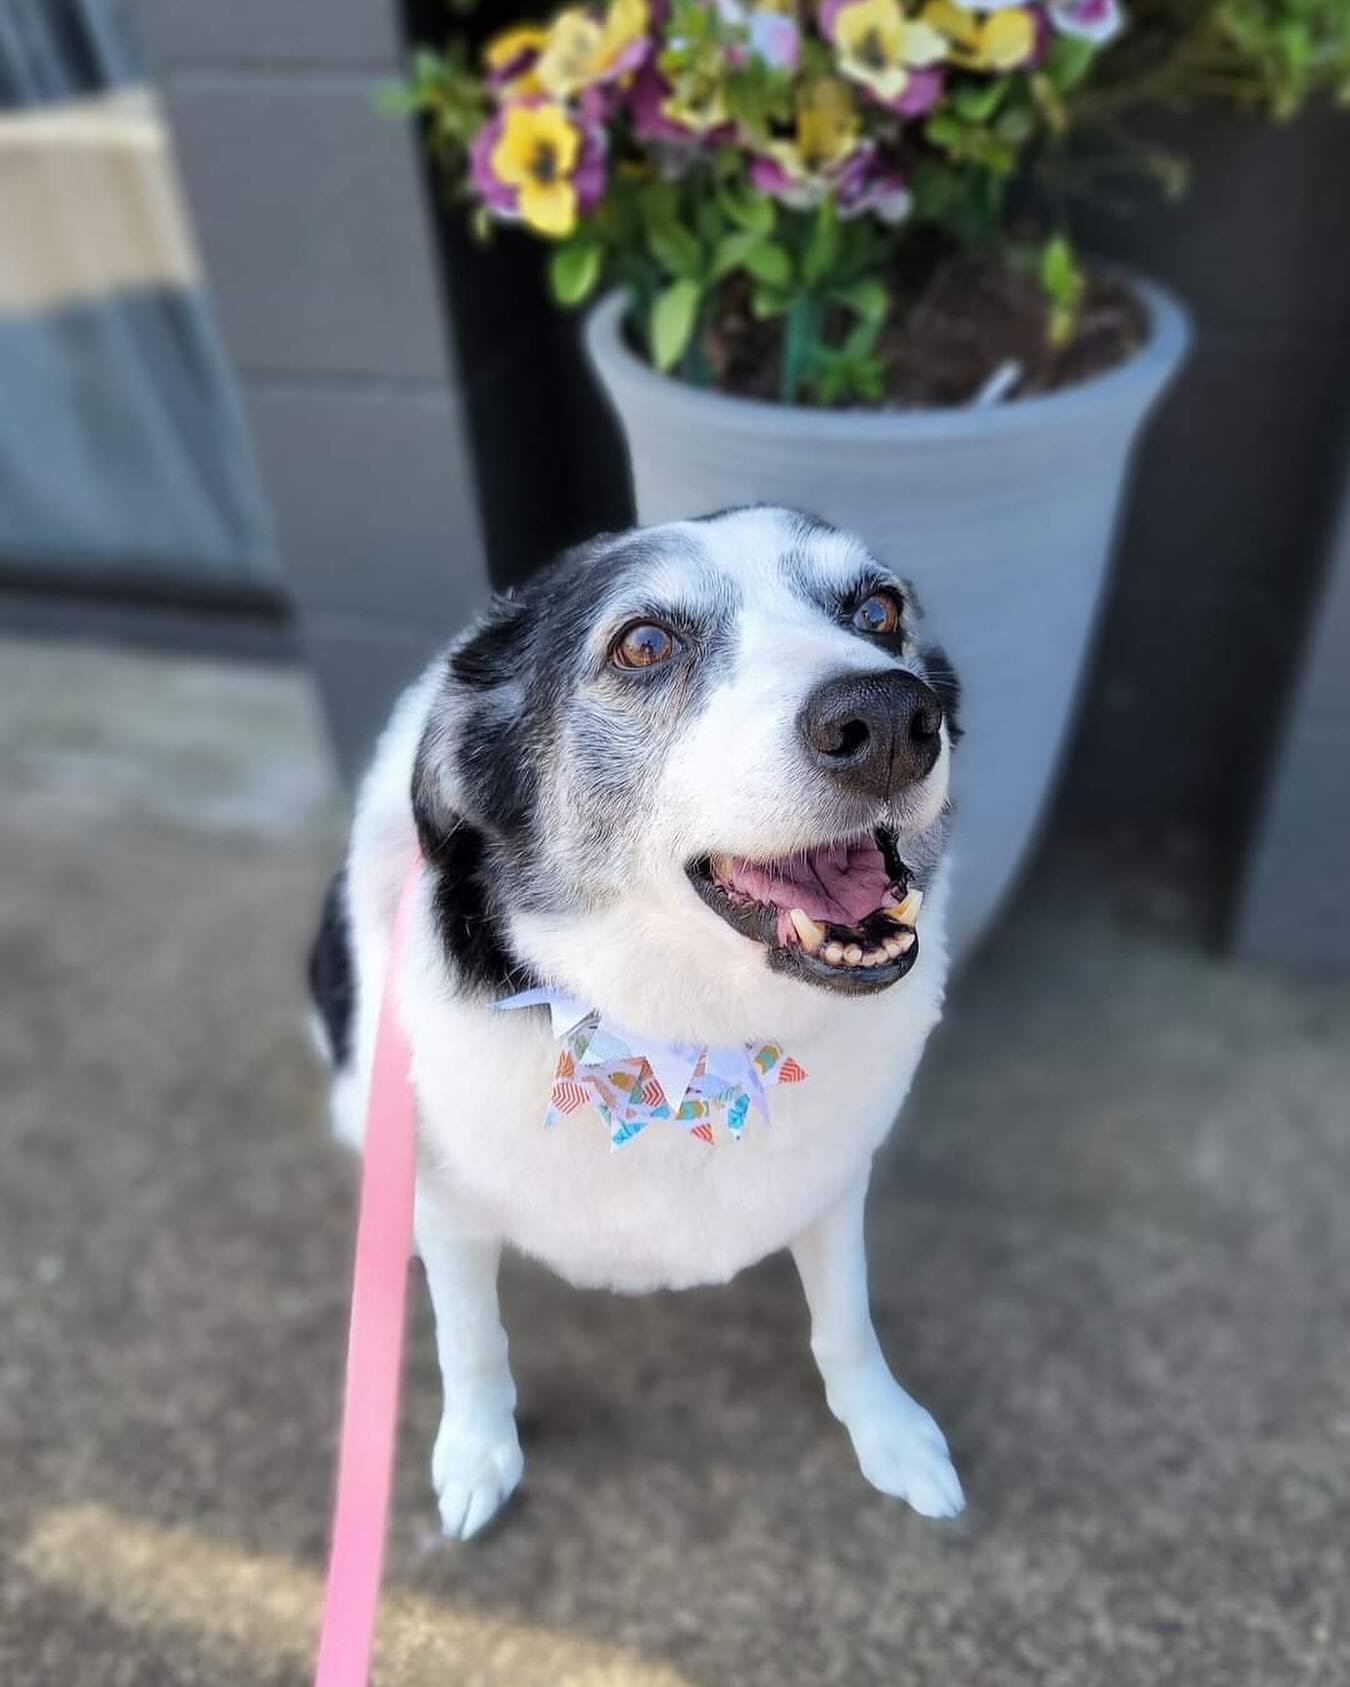 🚨New Pup Alert!🚨

Meet Chexie! 🐕 She's a lovely 12-year-old Border Collie who's looking for her forever home. Chexie has recently lost her pet siblings and is now in search of a loving and caring family who can shower her with lots of love and att